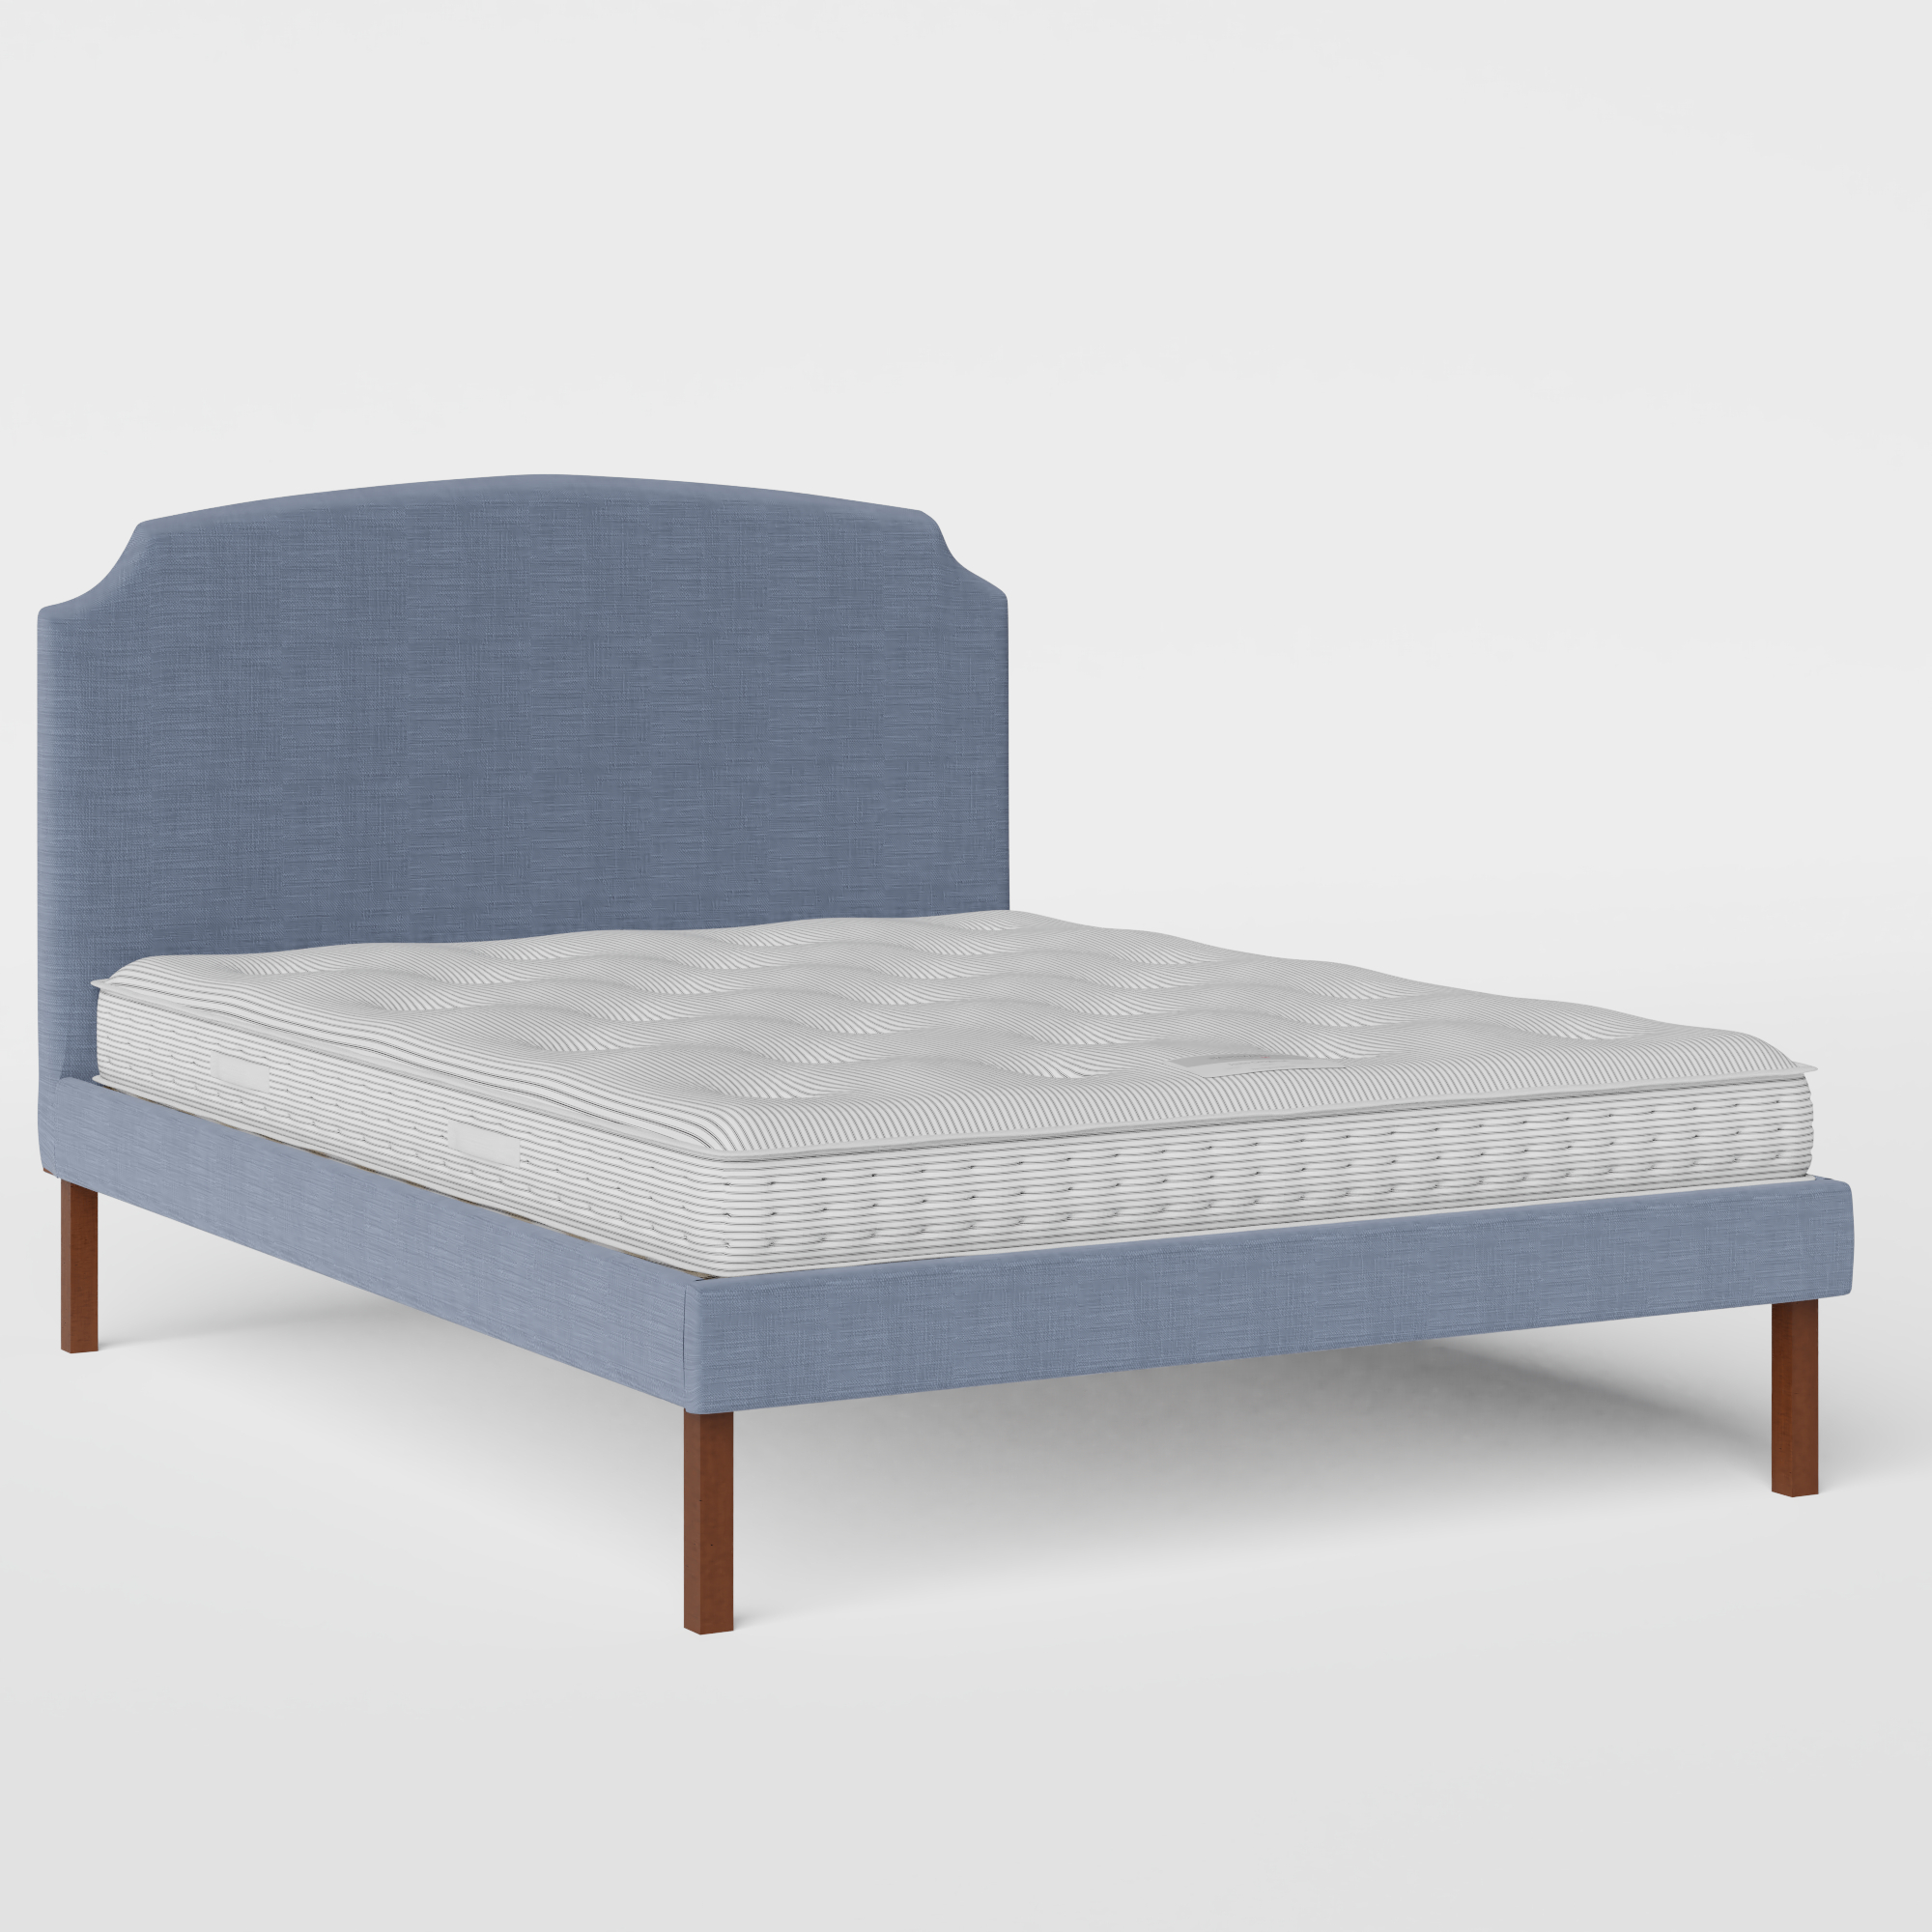 Kobe Upholstered stoffen bed in blauw